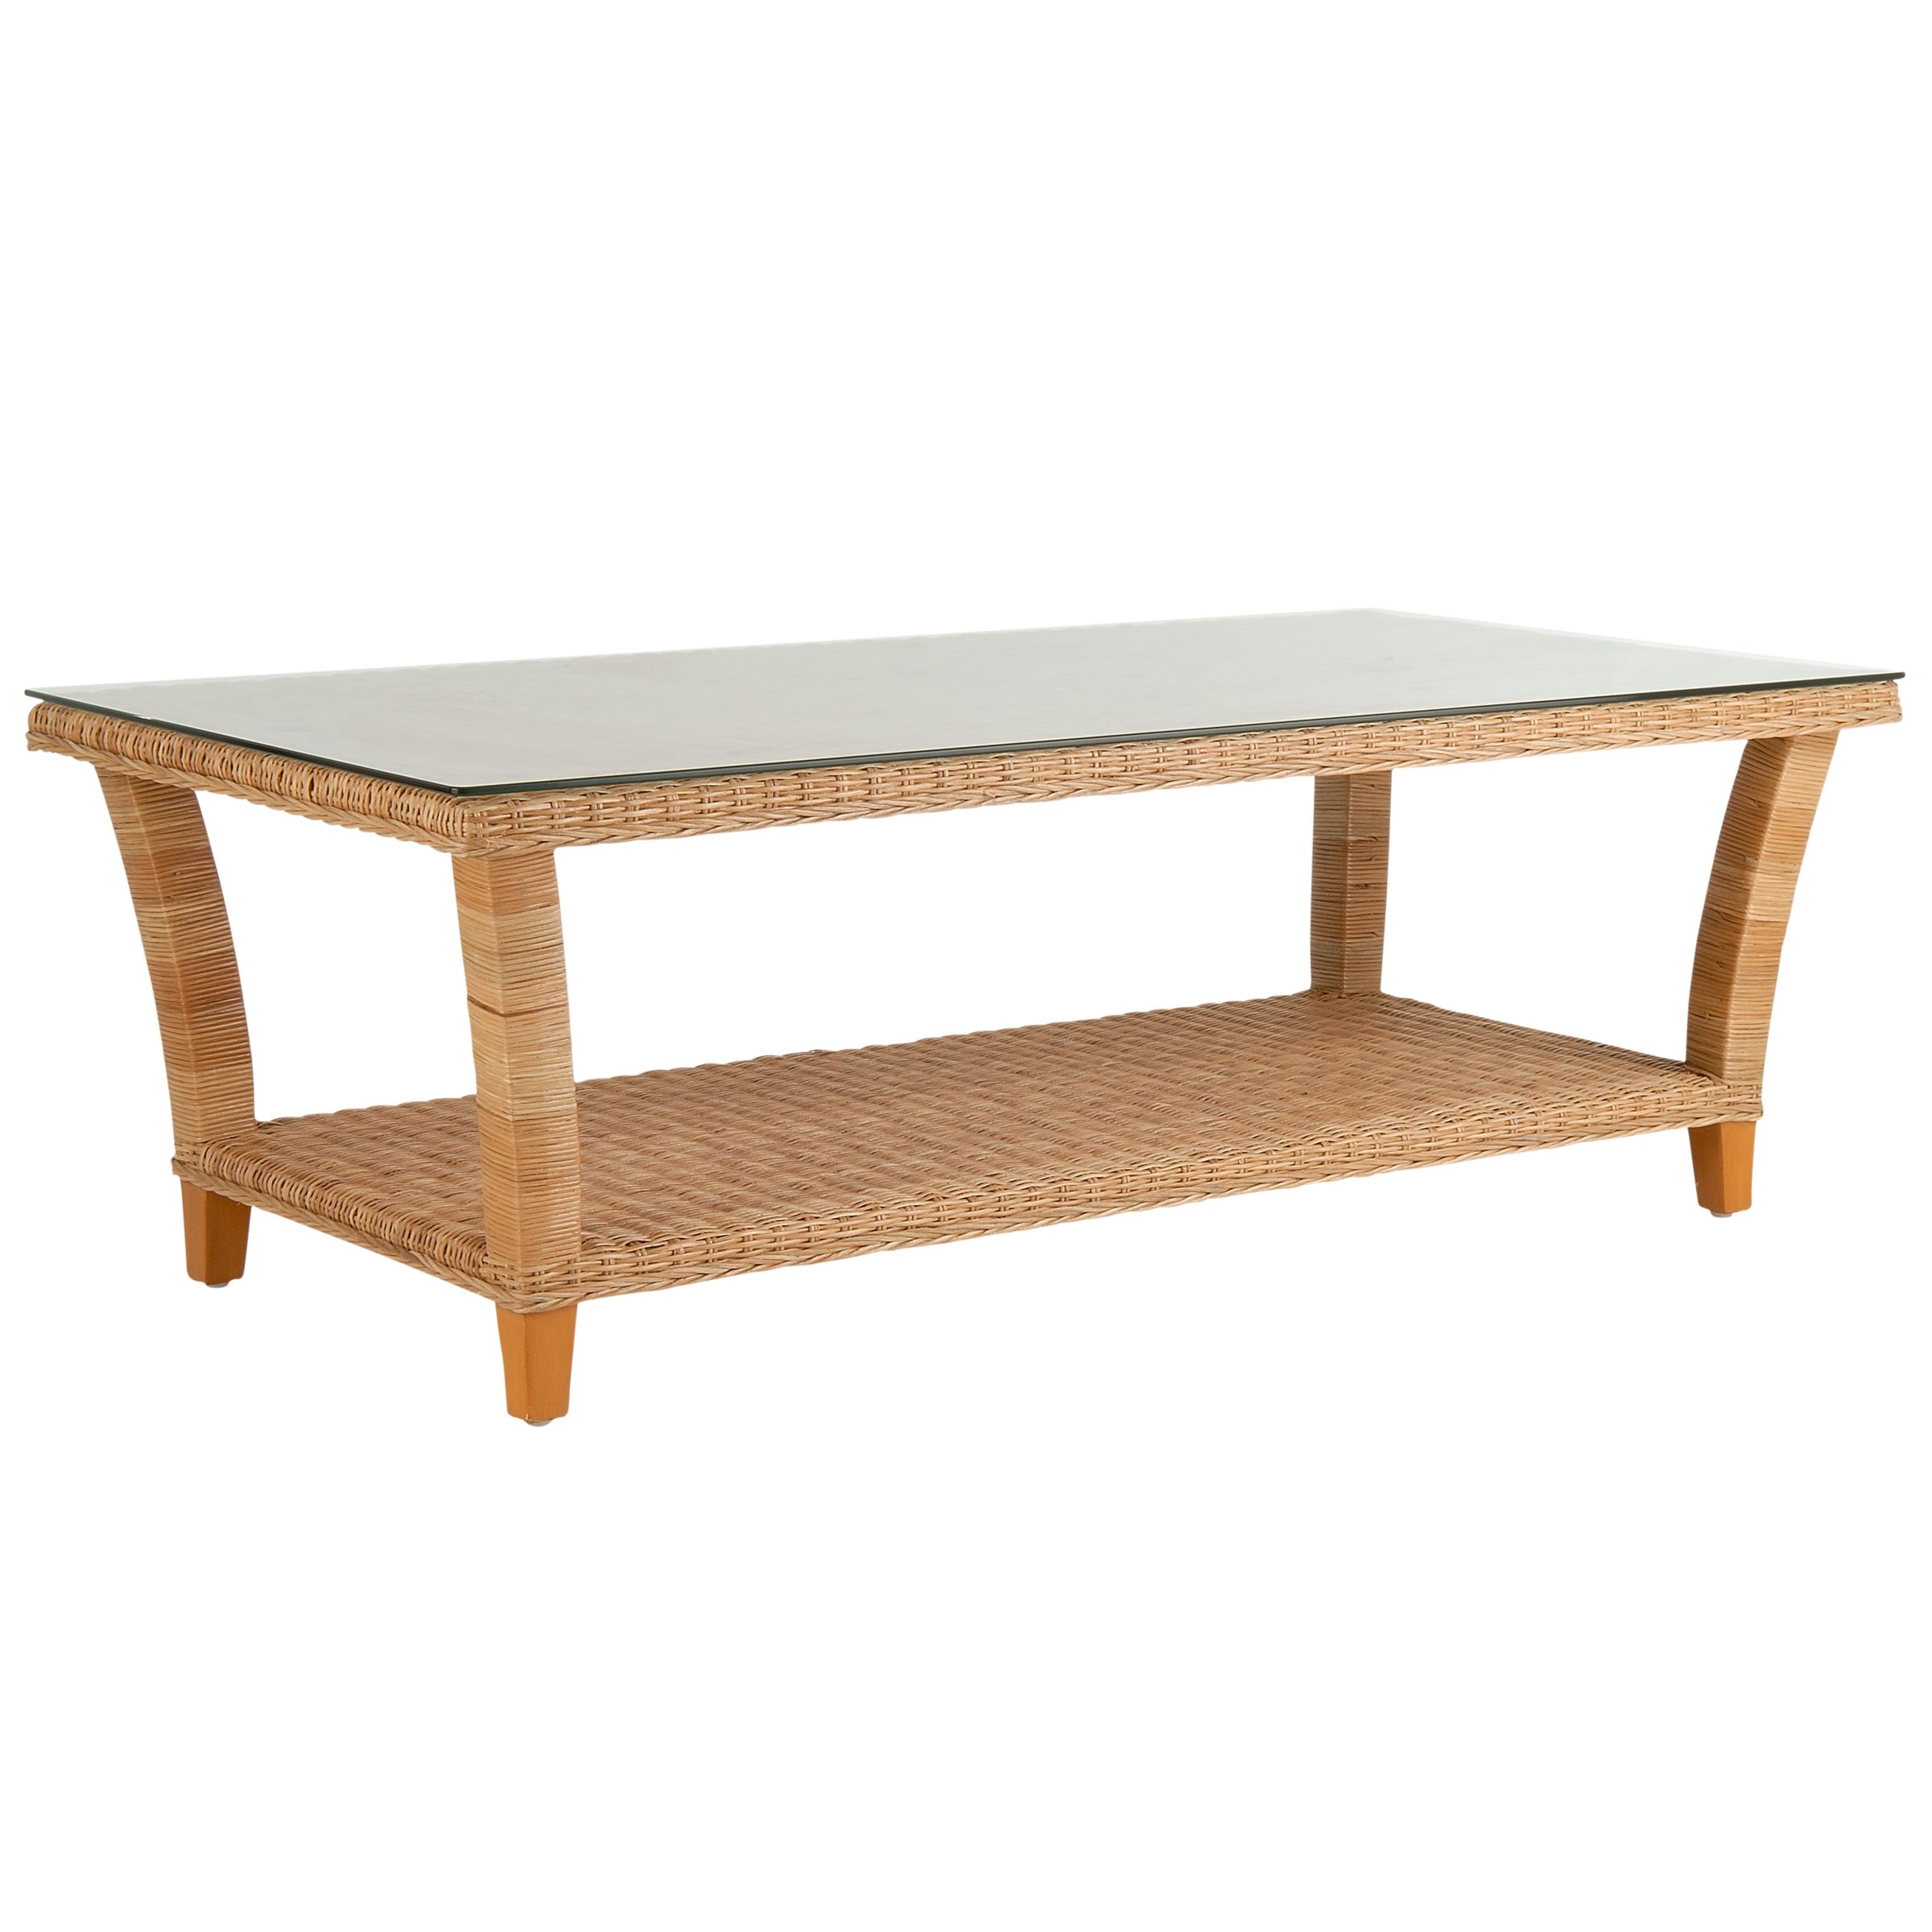 Nomad Coffee Table, Wheat